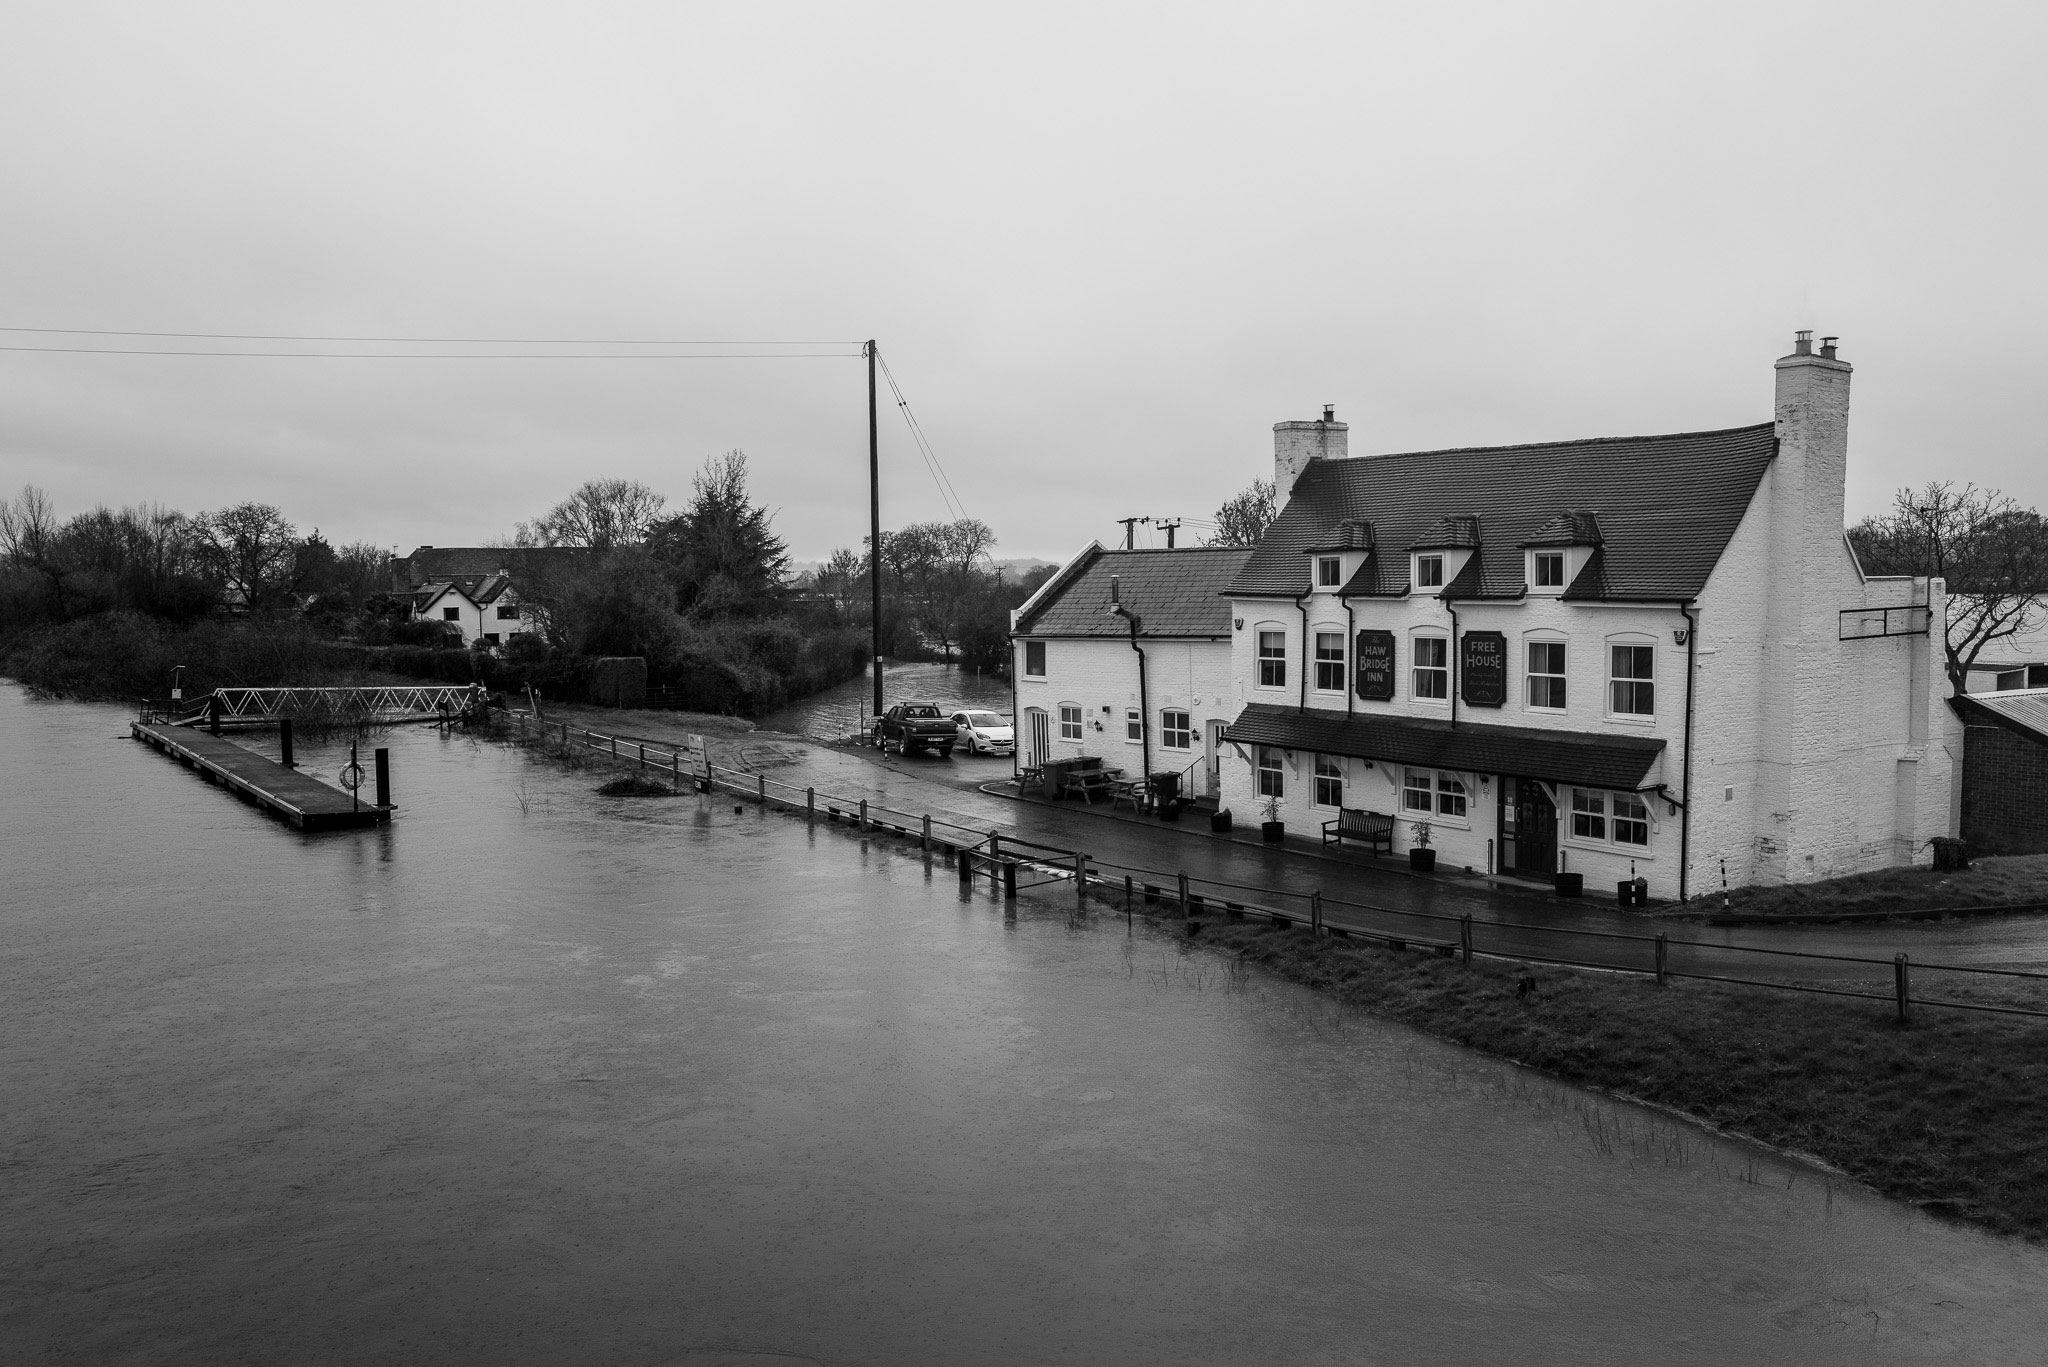 The Haw Bridge Inn with high water in the River Severn